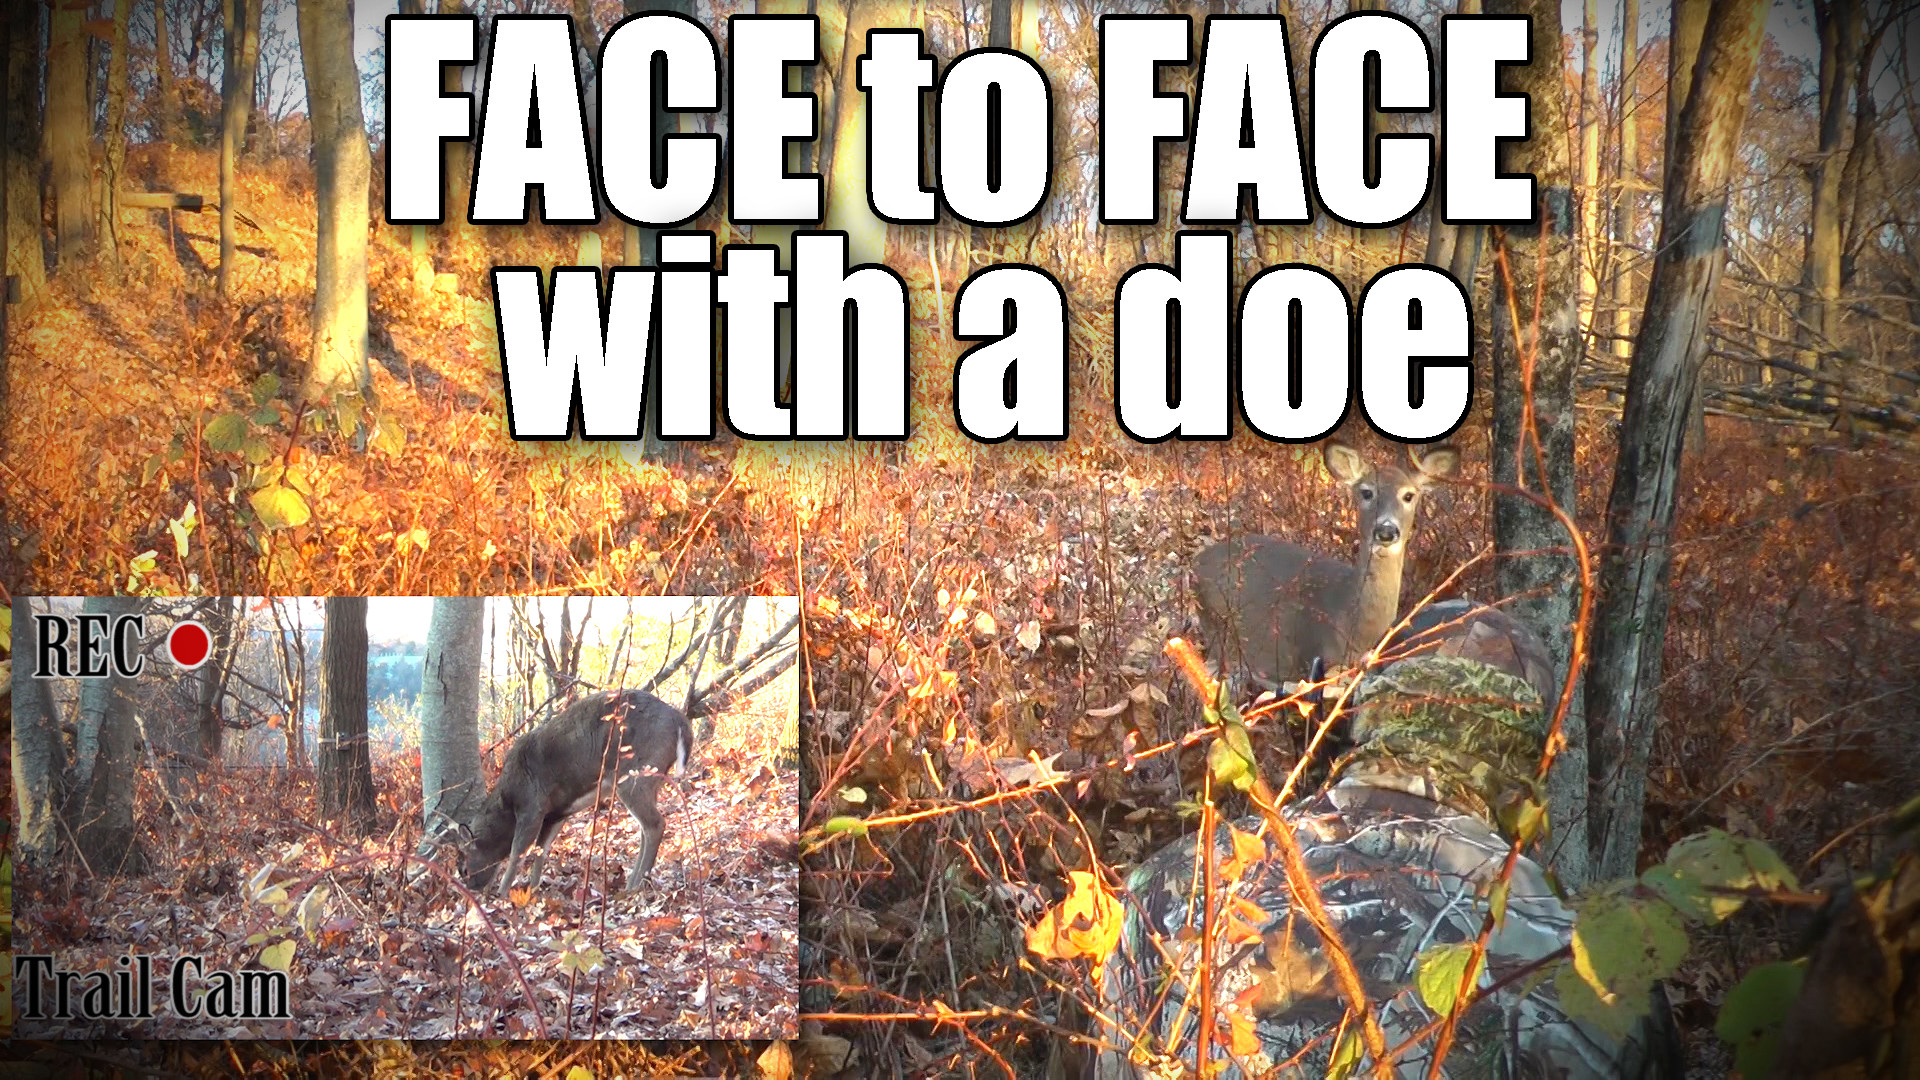 1920x1080 face-to-face-with-Doe-with-buck-in-